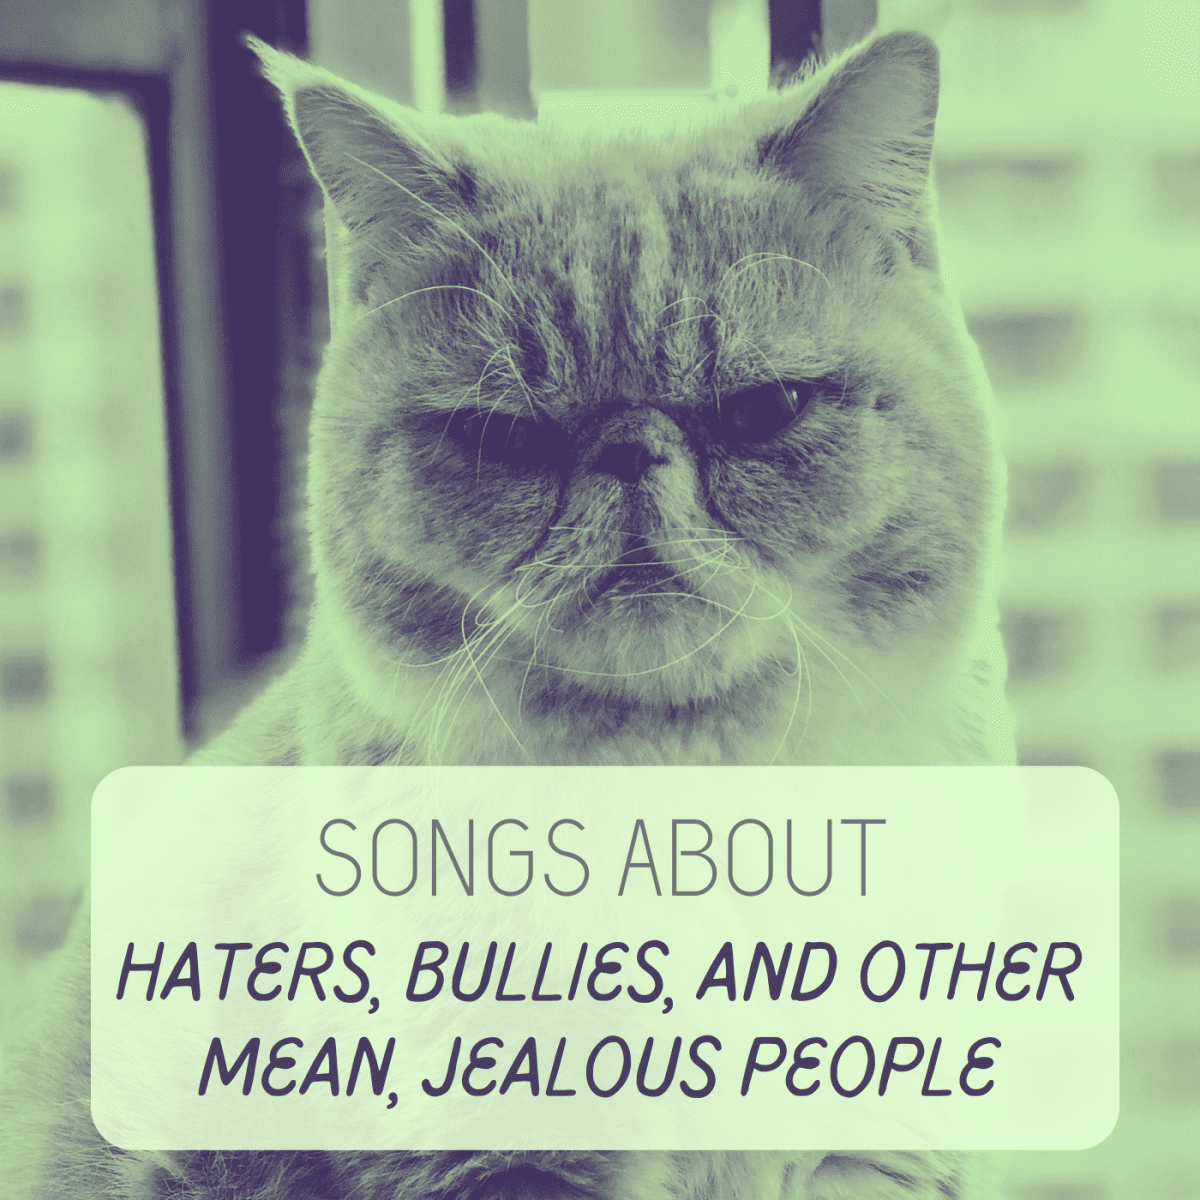 78 Songs About Haters, Bullies, and Other Mean, Jealous People - Spinditty